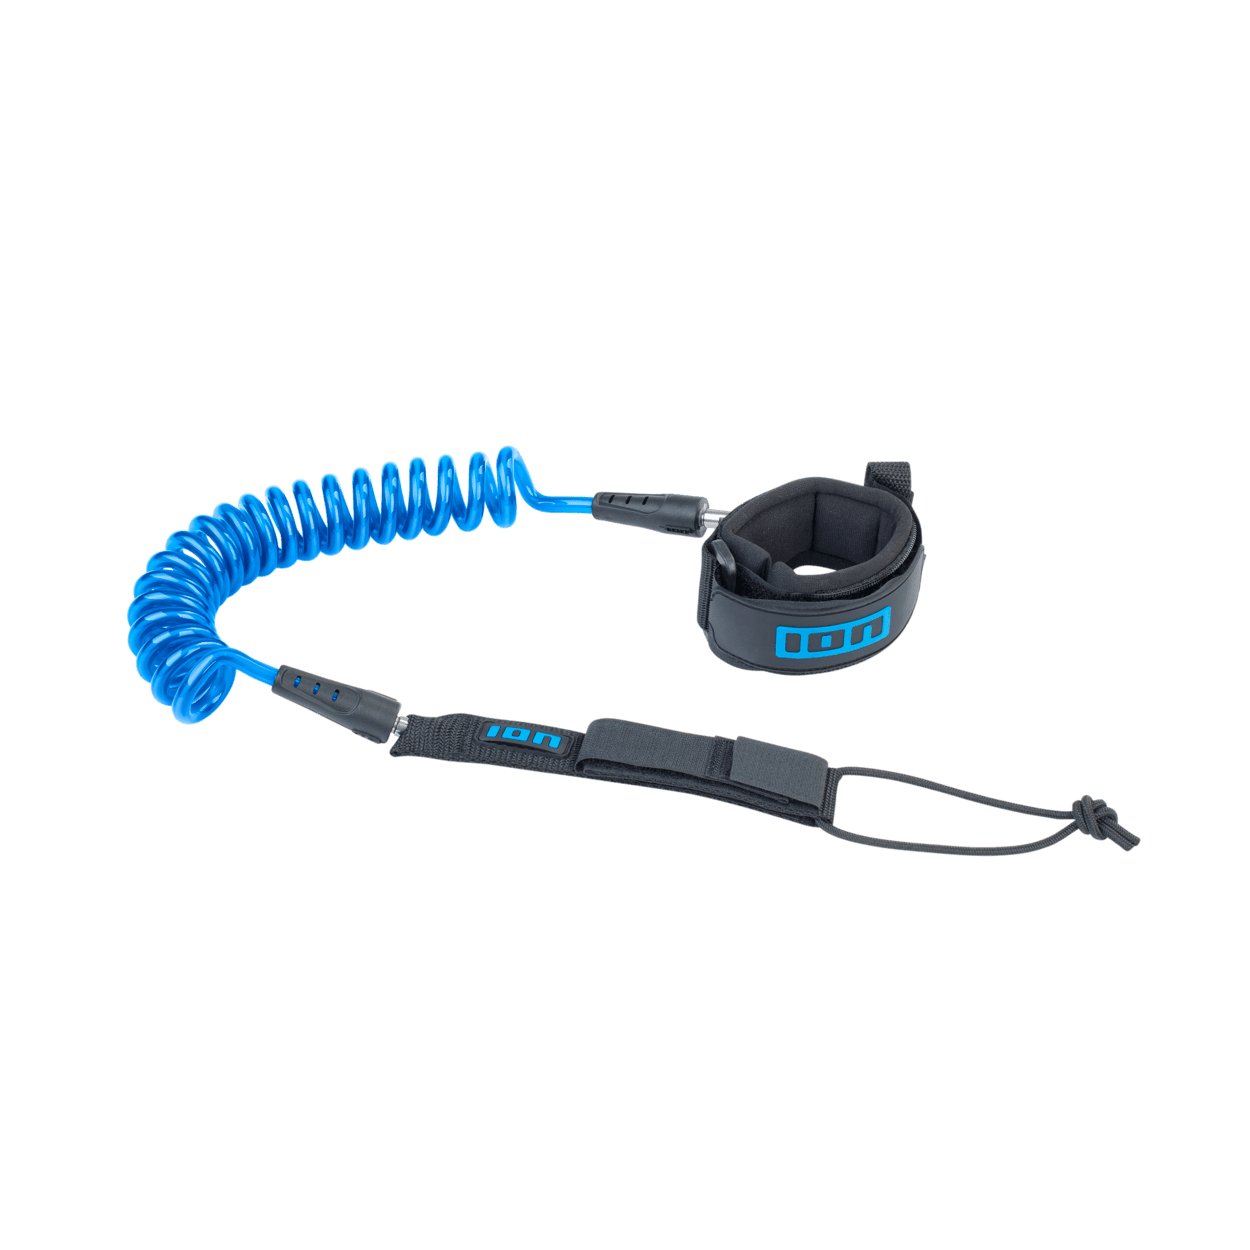 ION Wing Leash Core Coiled Wrist 2022 - Worthing Watersports - 9010583059907 - Accessories - ION Water